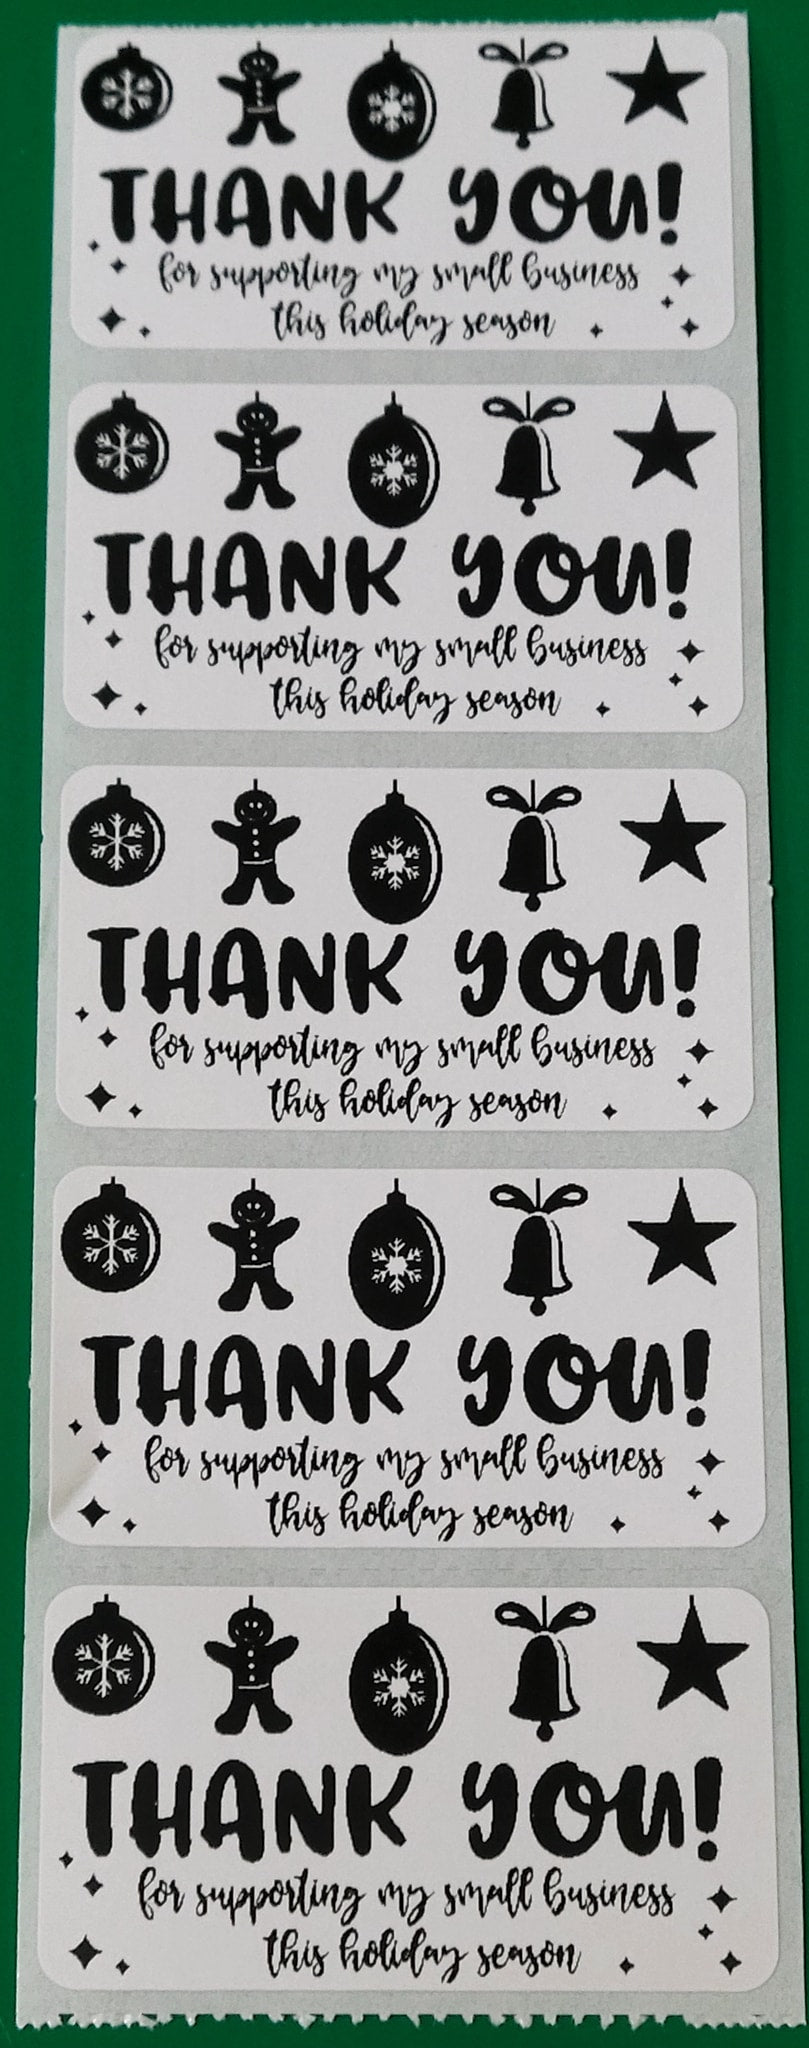 Thank you for supporting my small business this holiday season Christmas 50 OR 100 count